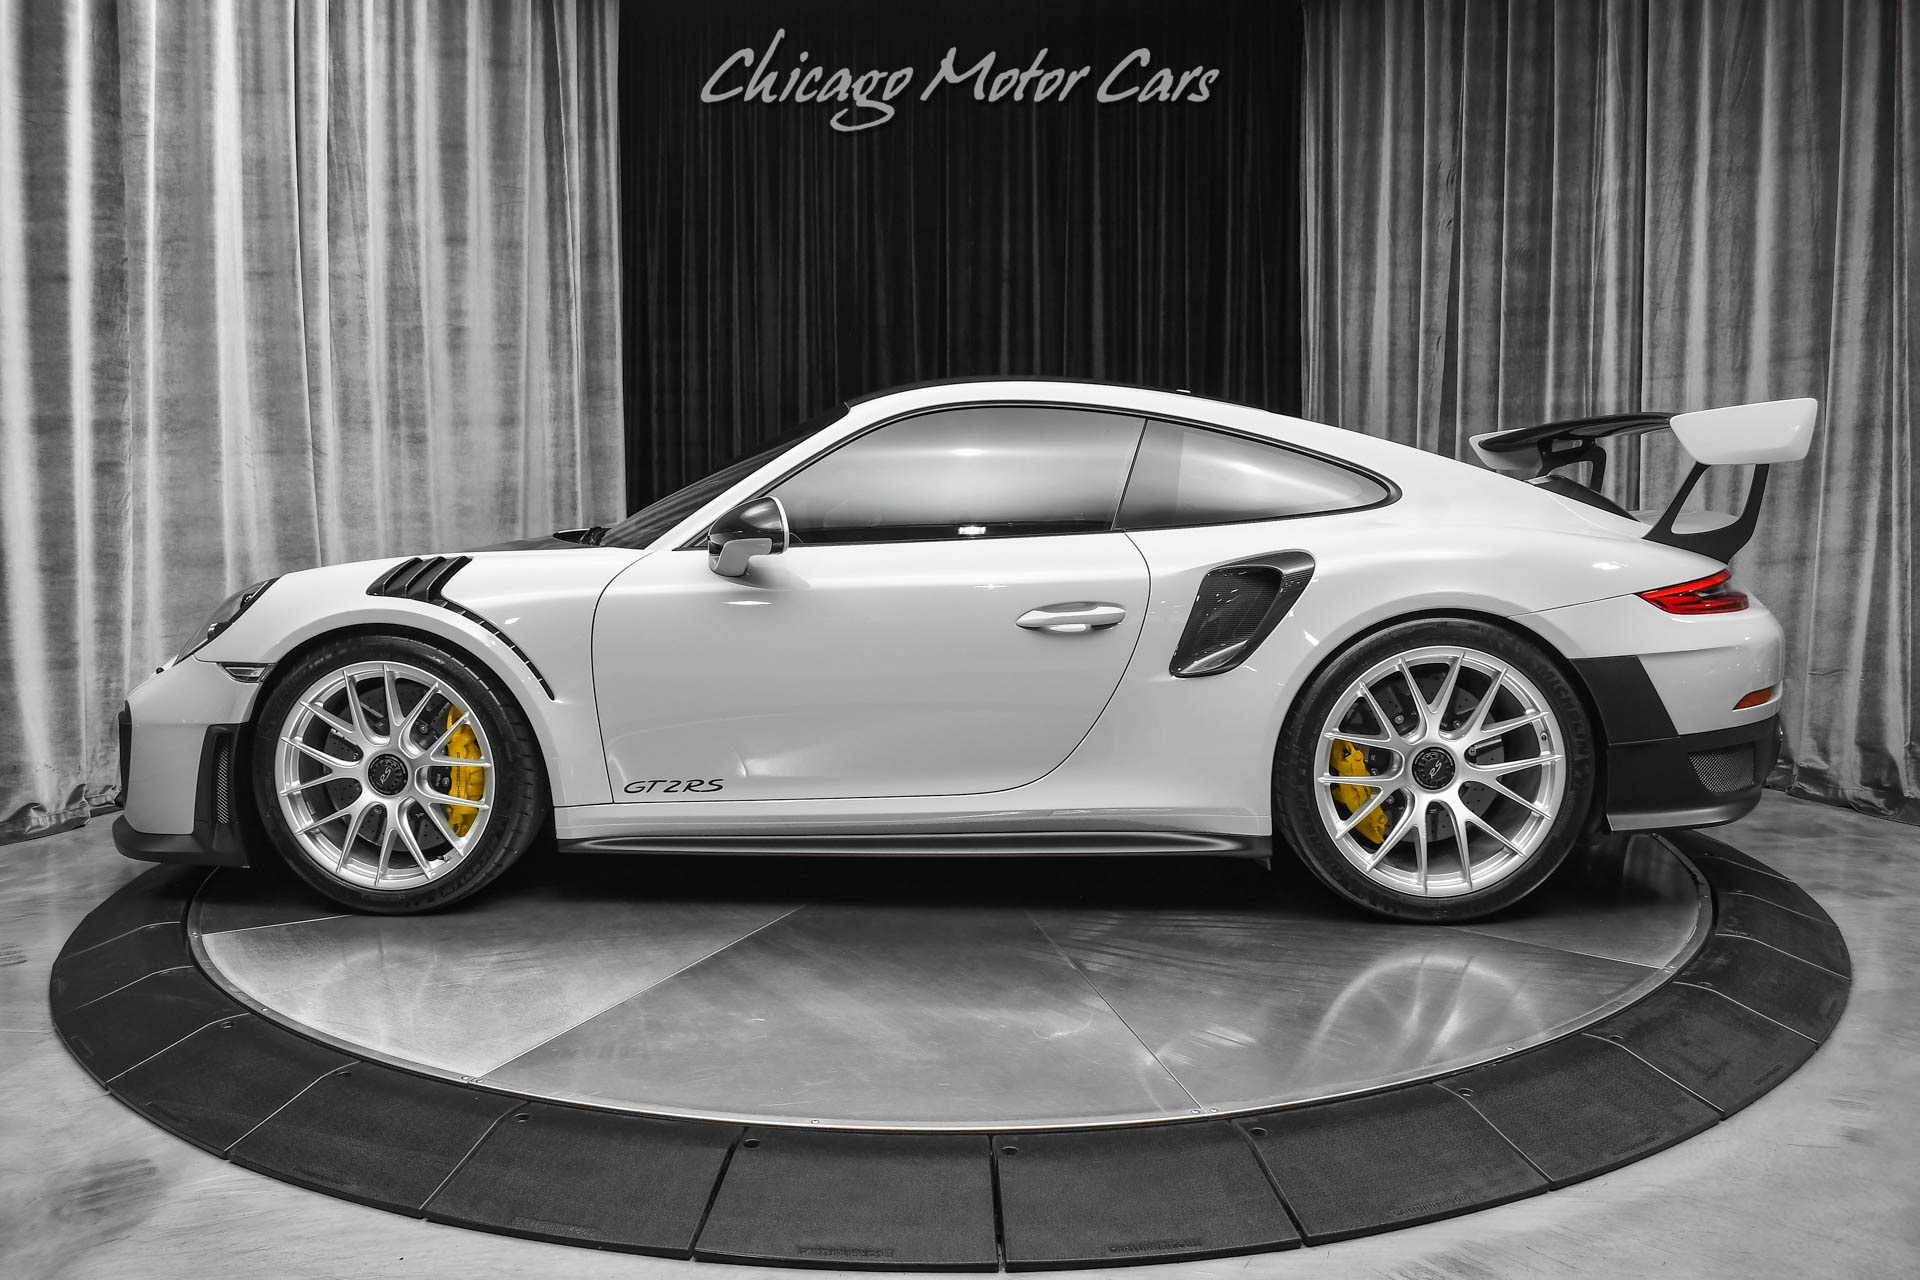 Used-2018-Porsche-911-GT2-RS-Weissach-Package-RARE-Magnesium-Wheels-FULL-PPF-LOADED-PERFECT